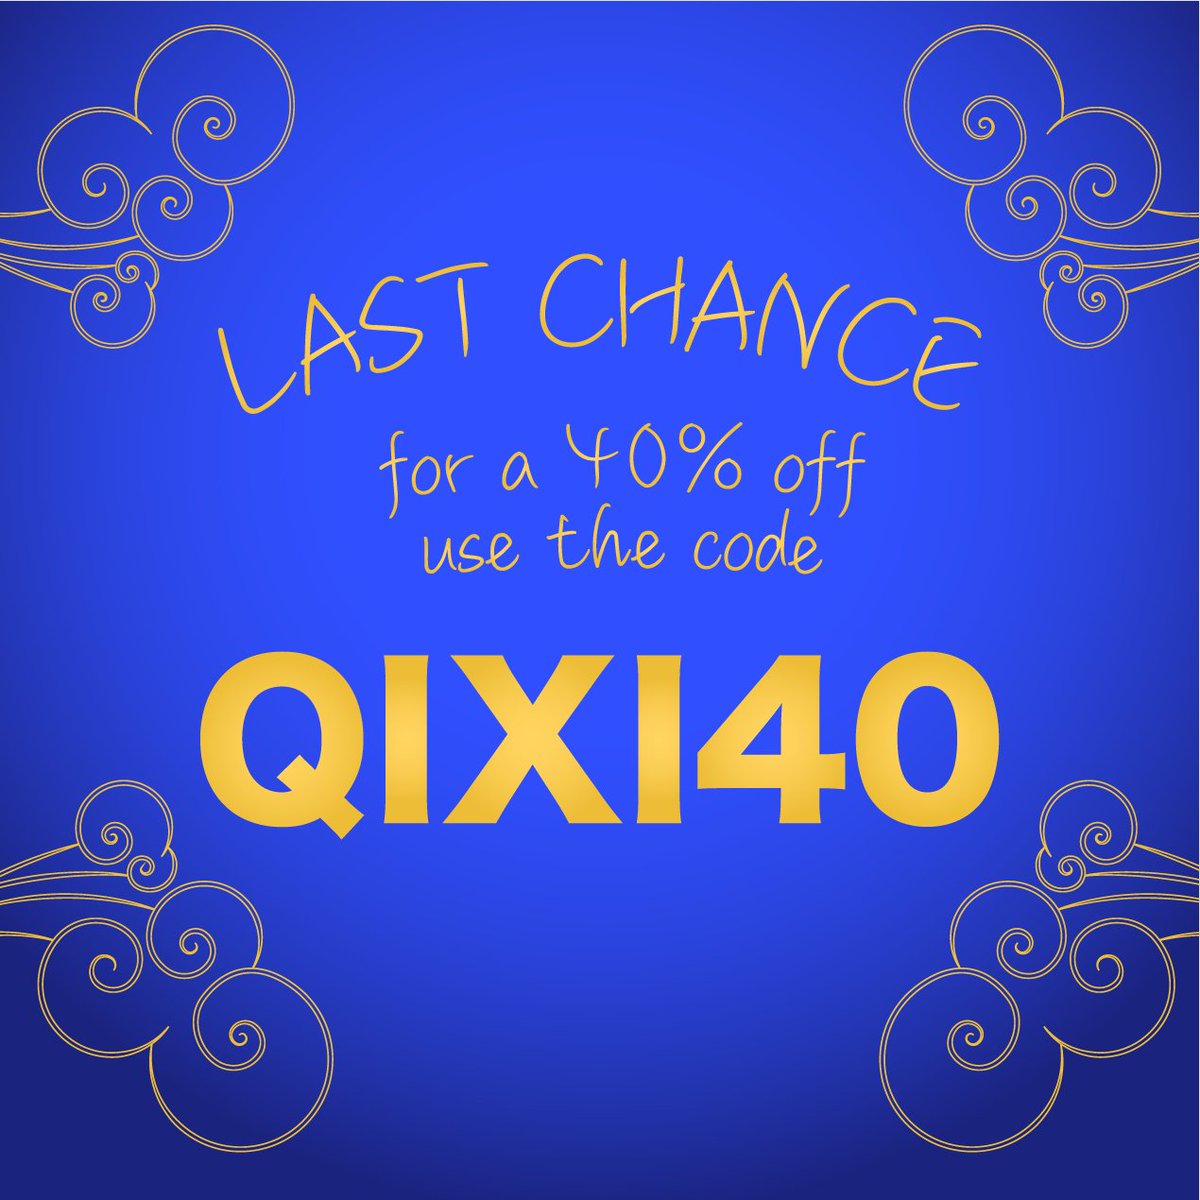 📢 Don't miss this limited time offer, use the code: QIXI40 for a 40% discount on 🌐 morebooks.shop ❗THE OFFER ENDS TODAY AT MIDNIGHT 🕛 #offers #OfferSale #discounts #authors #books #bookstagram